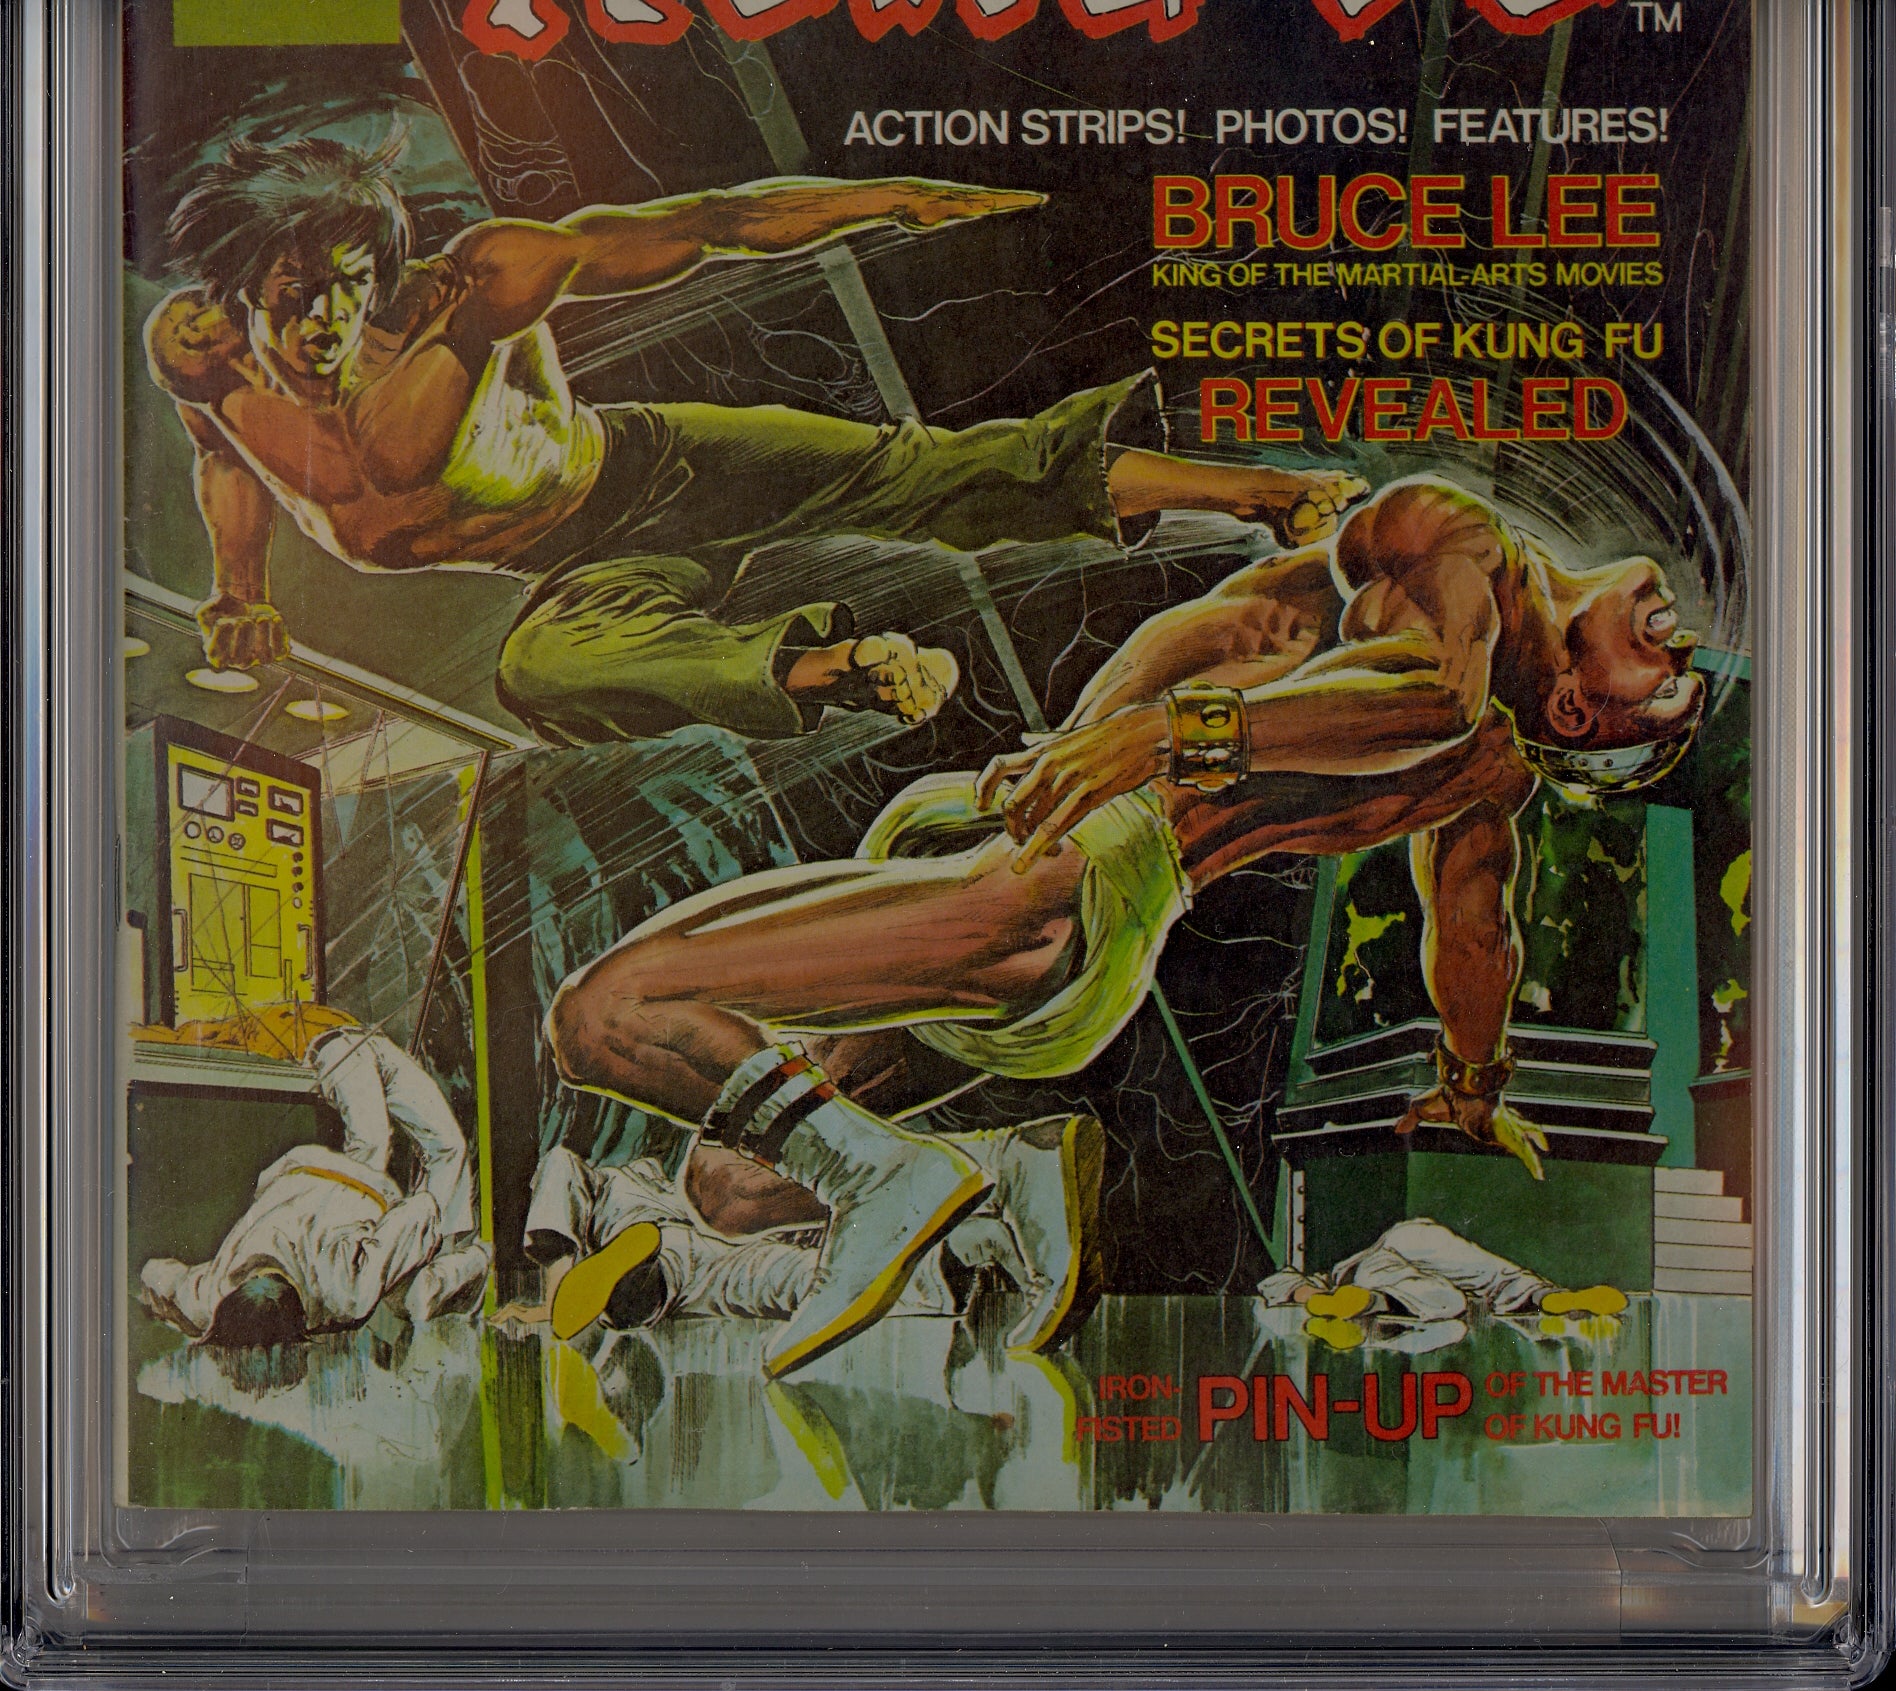 Deadly Hands of Kung Fu #1 (1974) Shang Chi, Neal Adams, Bruce Lee